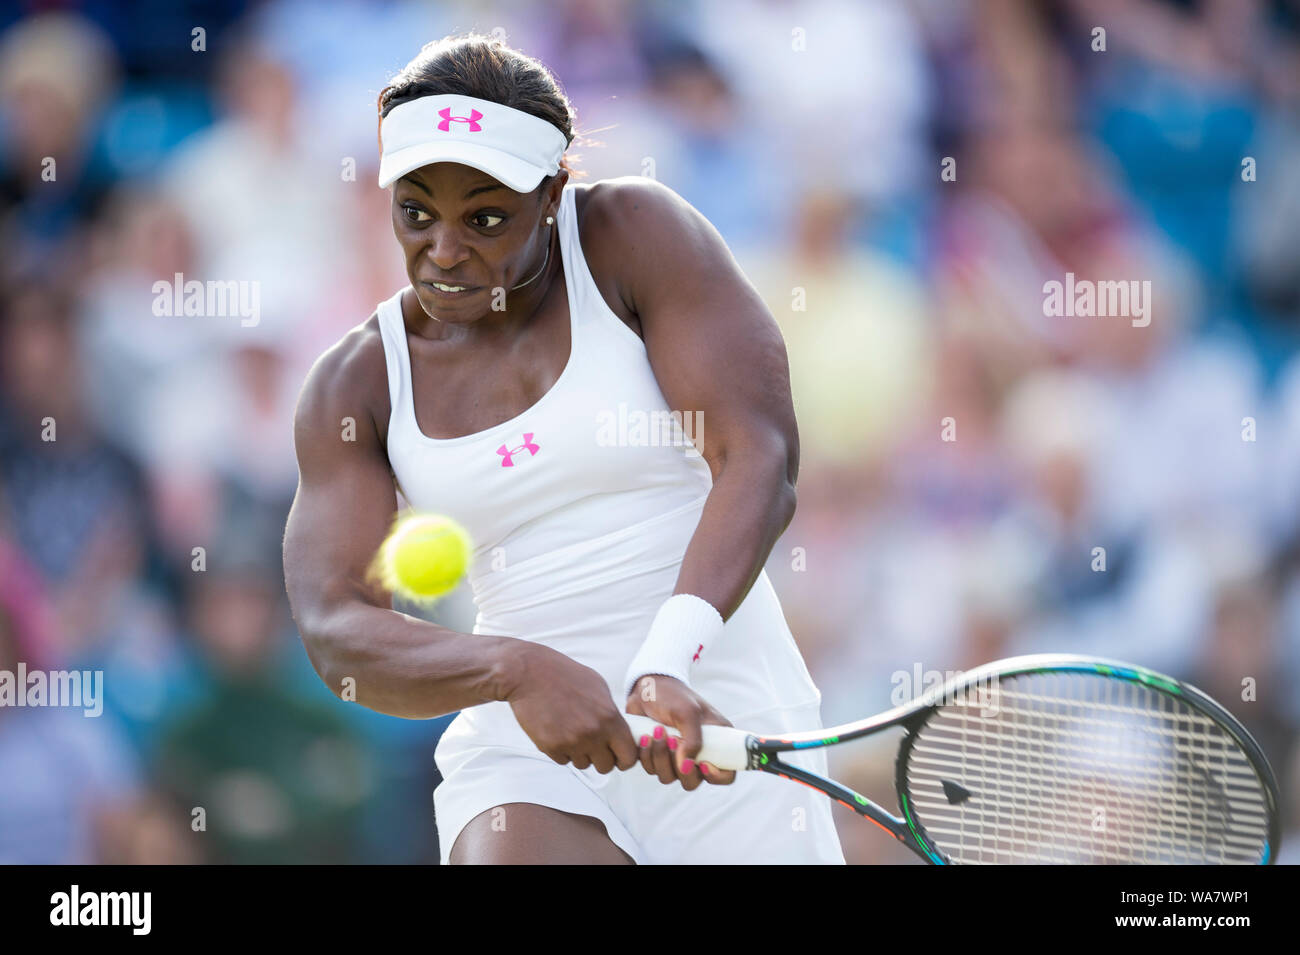 Sloane Stephens - Aegon International 2015, Eastbourne, England, Sloane Stephens of USA in action playing two handed backhand against Heather Watson o Stock Photo